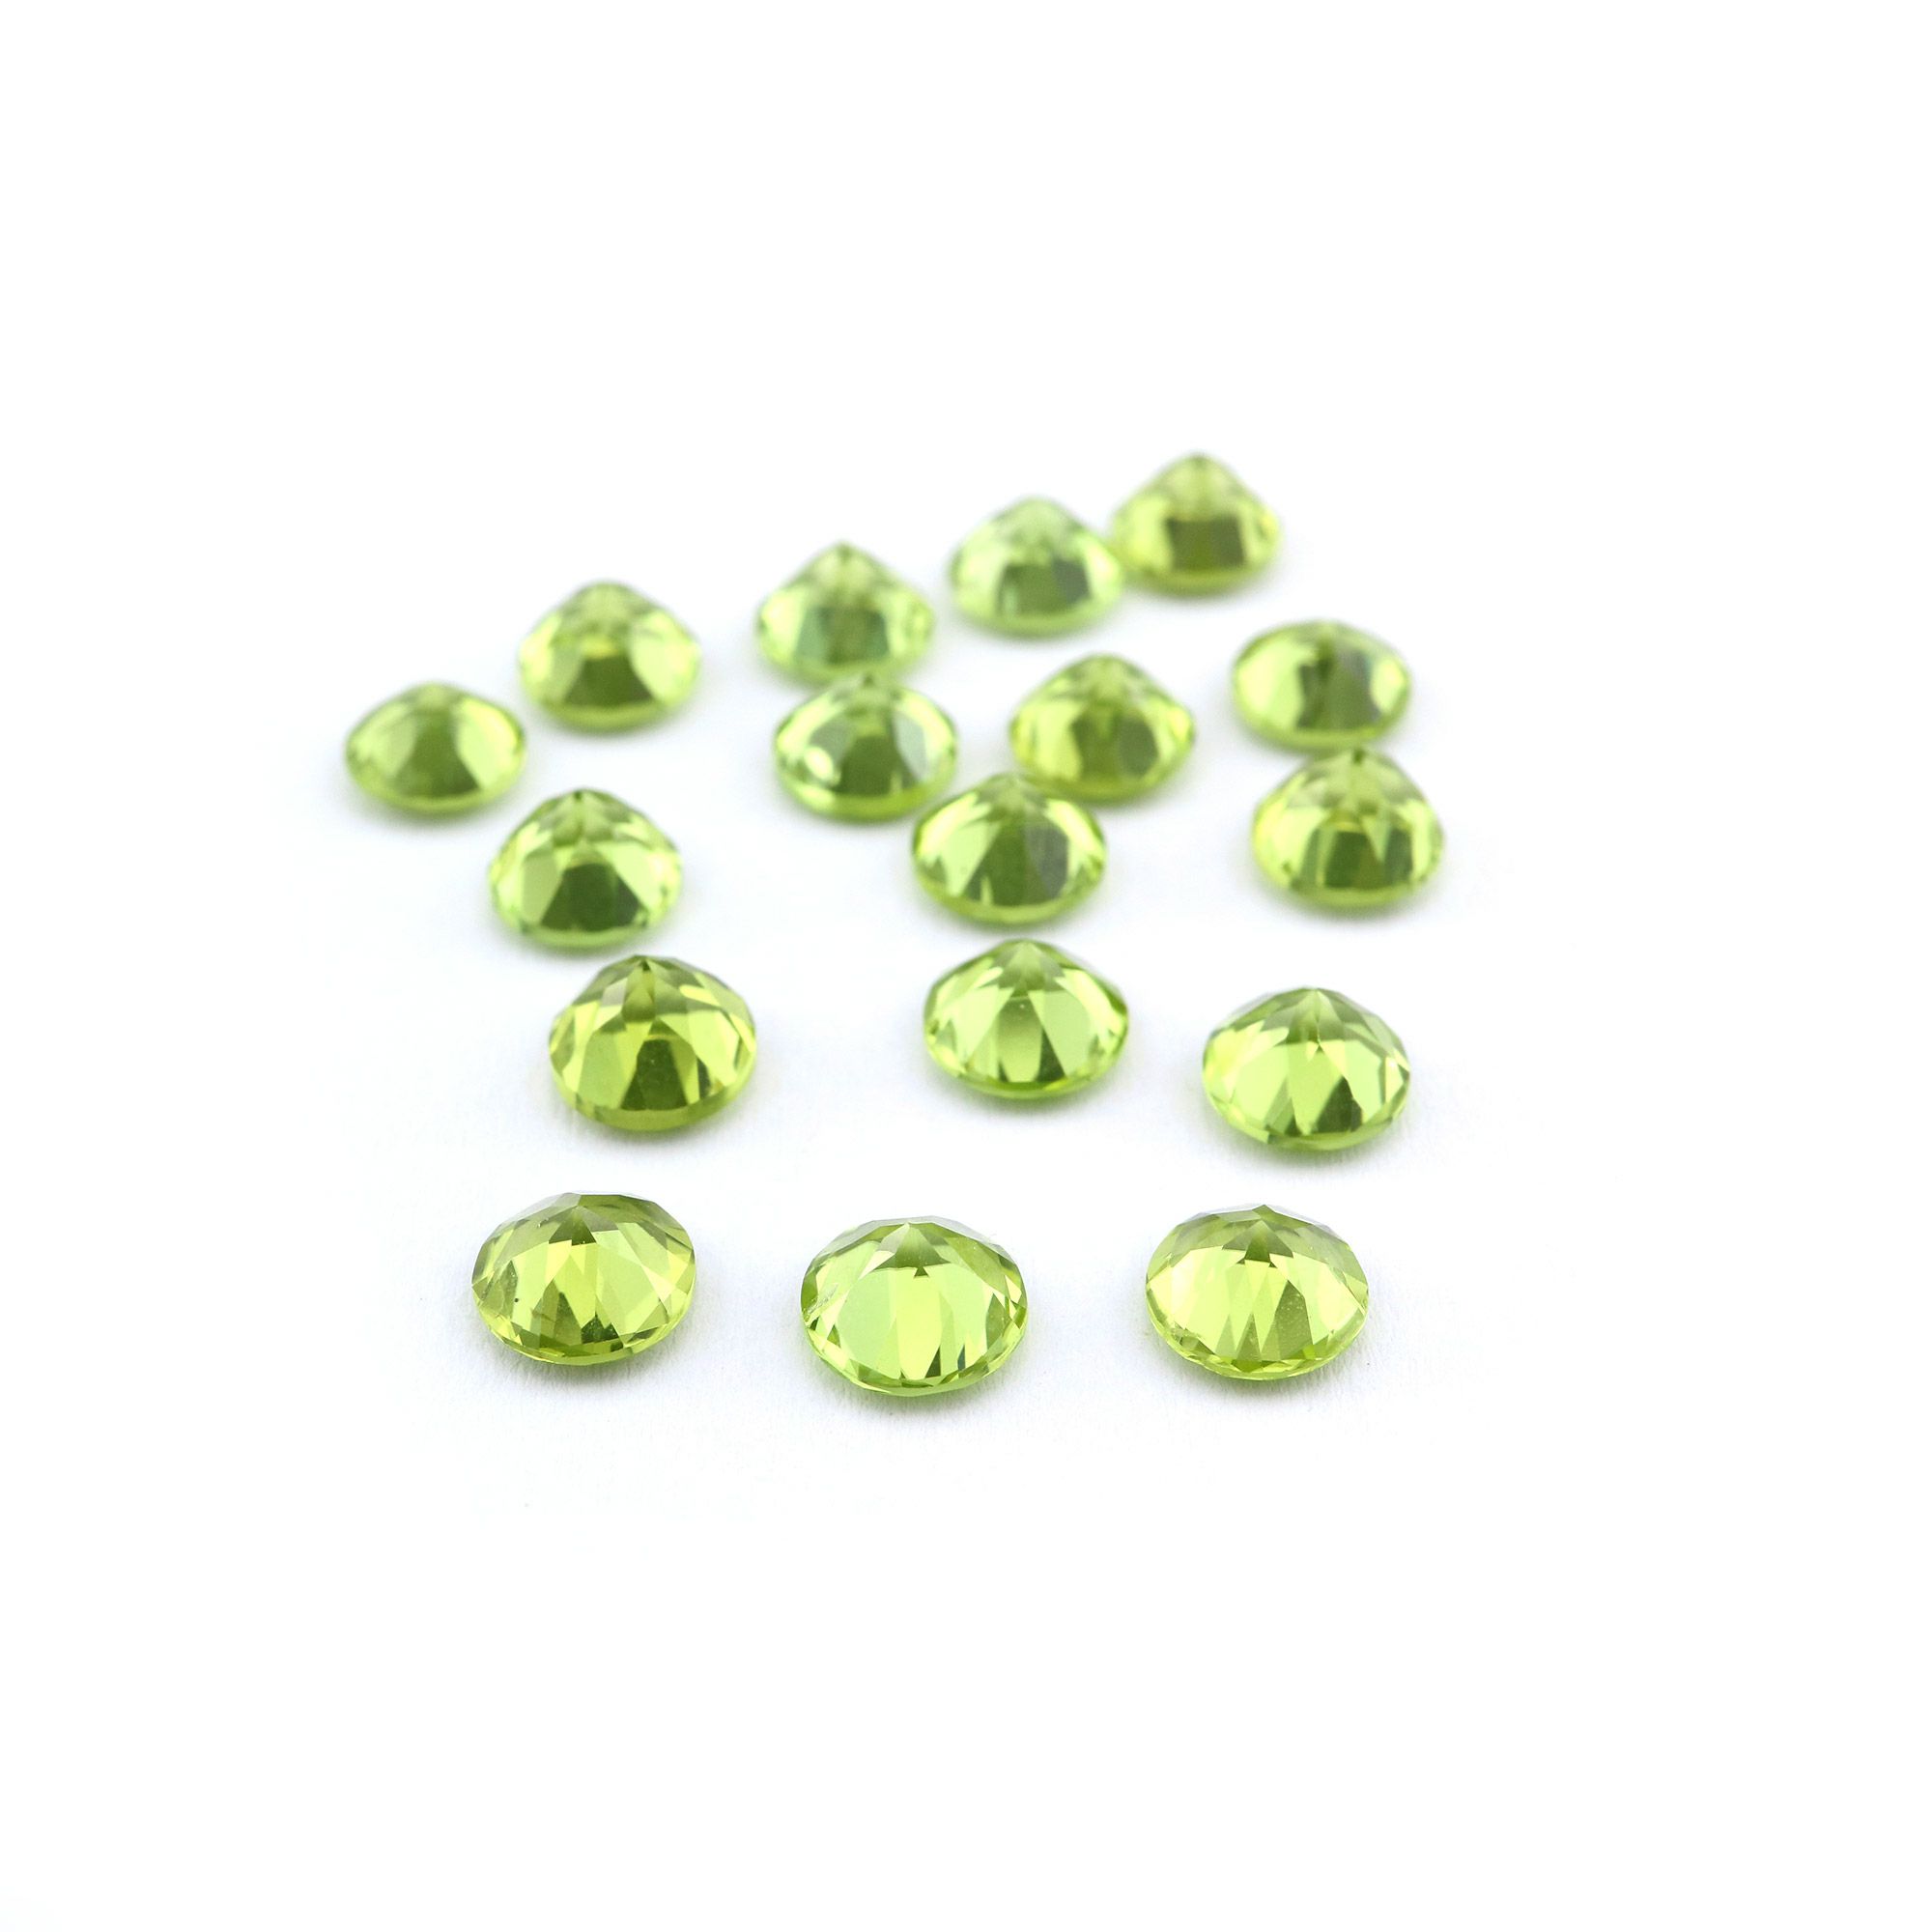 5Pcs 1-8MM Round Green Peridot August Birthstone Faceted Cut Loose Gemstone Natural Semi Precious Stone DIY Jewelry Supplies 4110165 - Click Image to Close